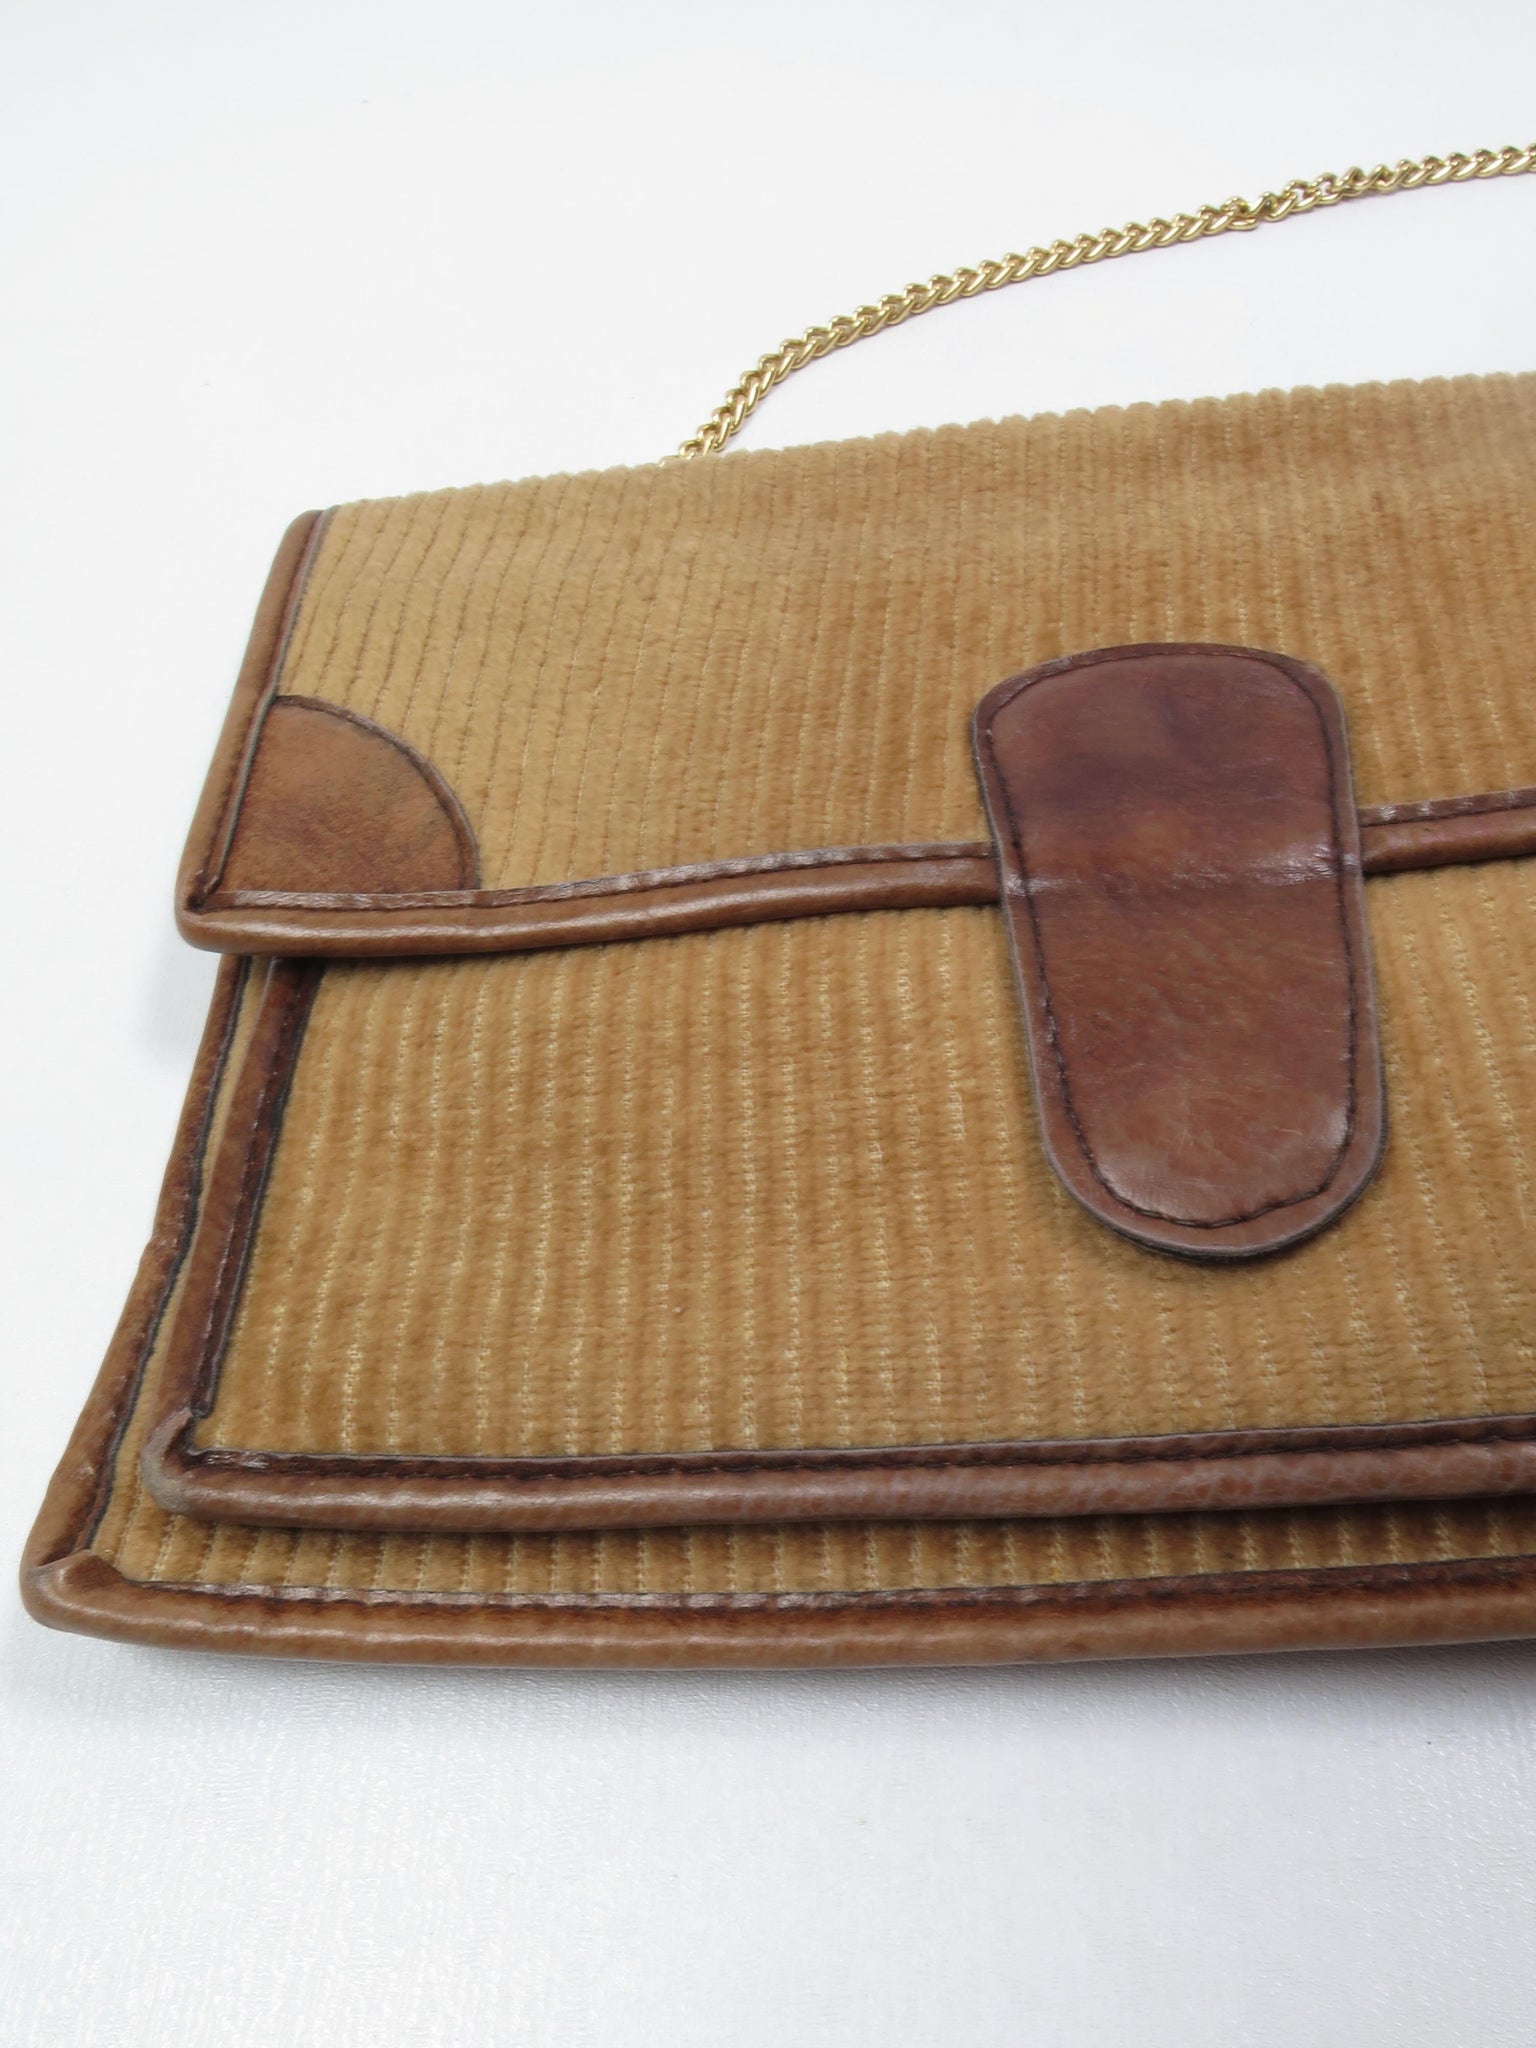 Tan/Beige Vintage Bag Corded Fabric 1970s - The Harlequin